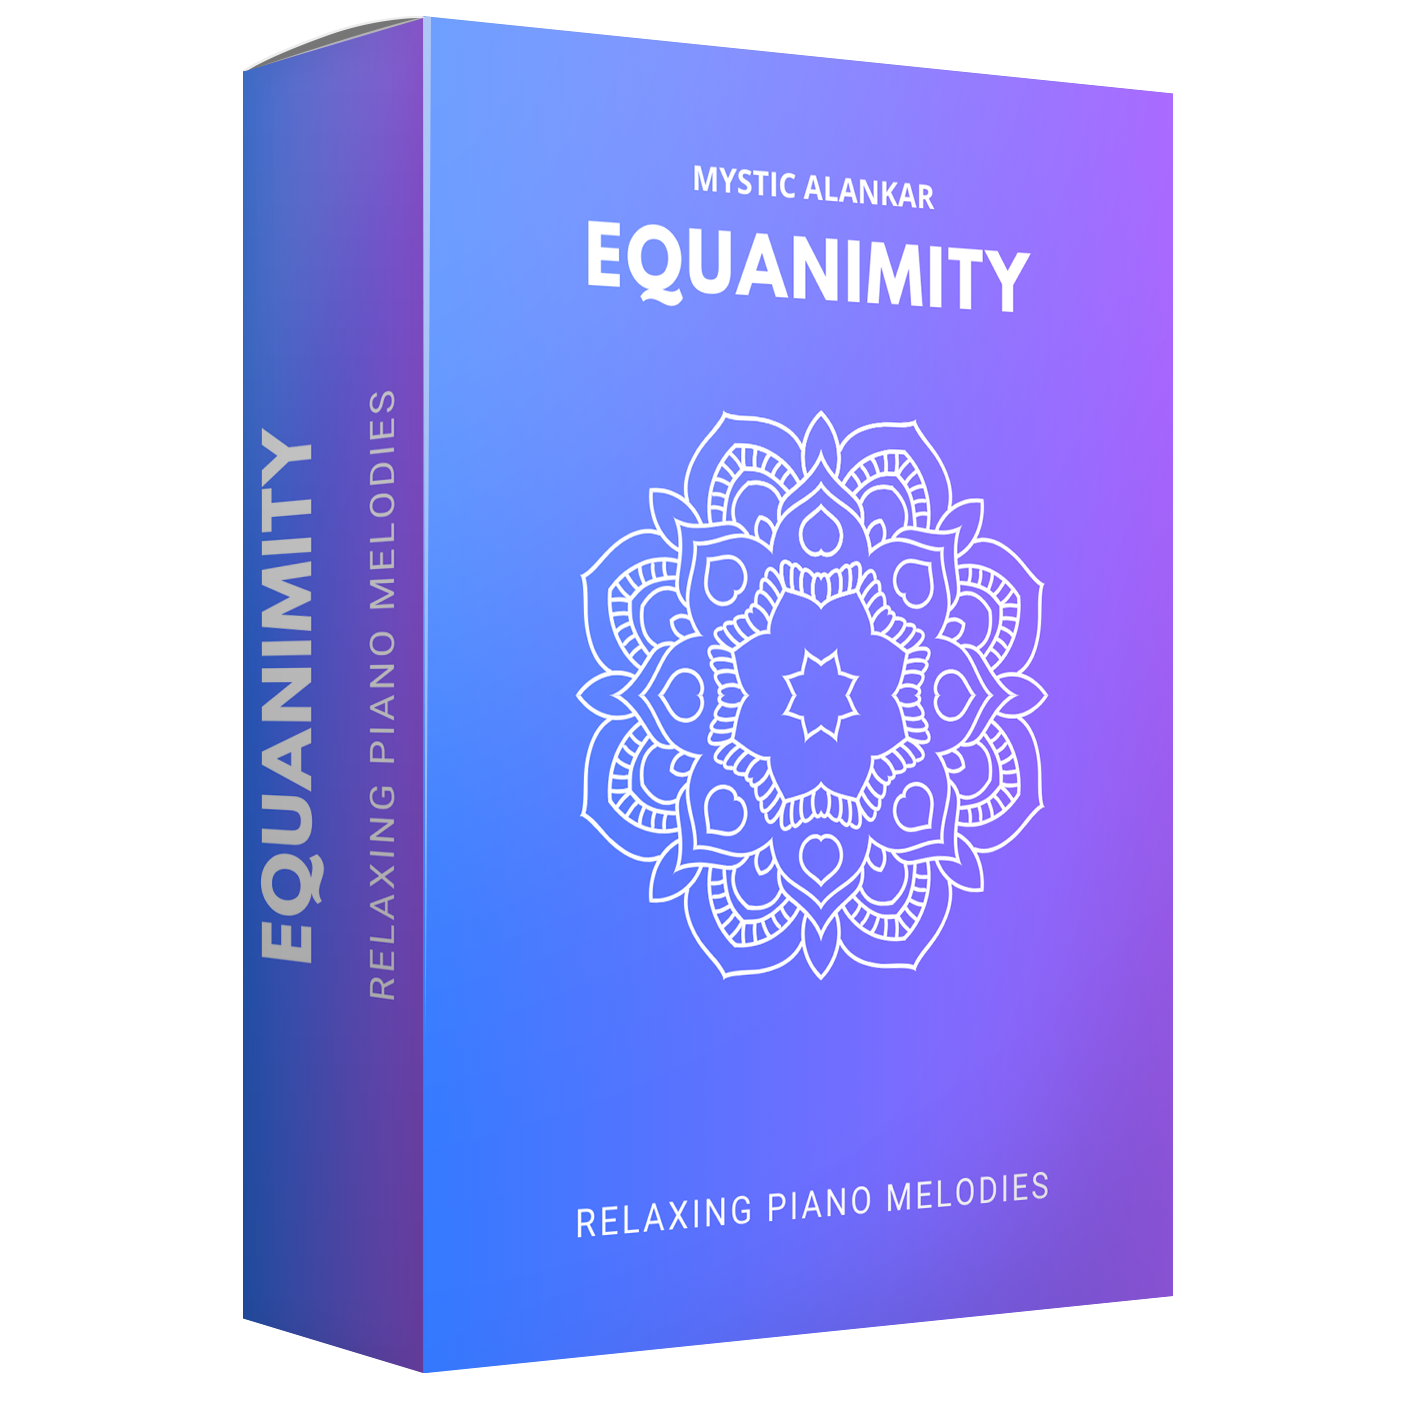 Equanimity - Relaxing Piano Melodies